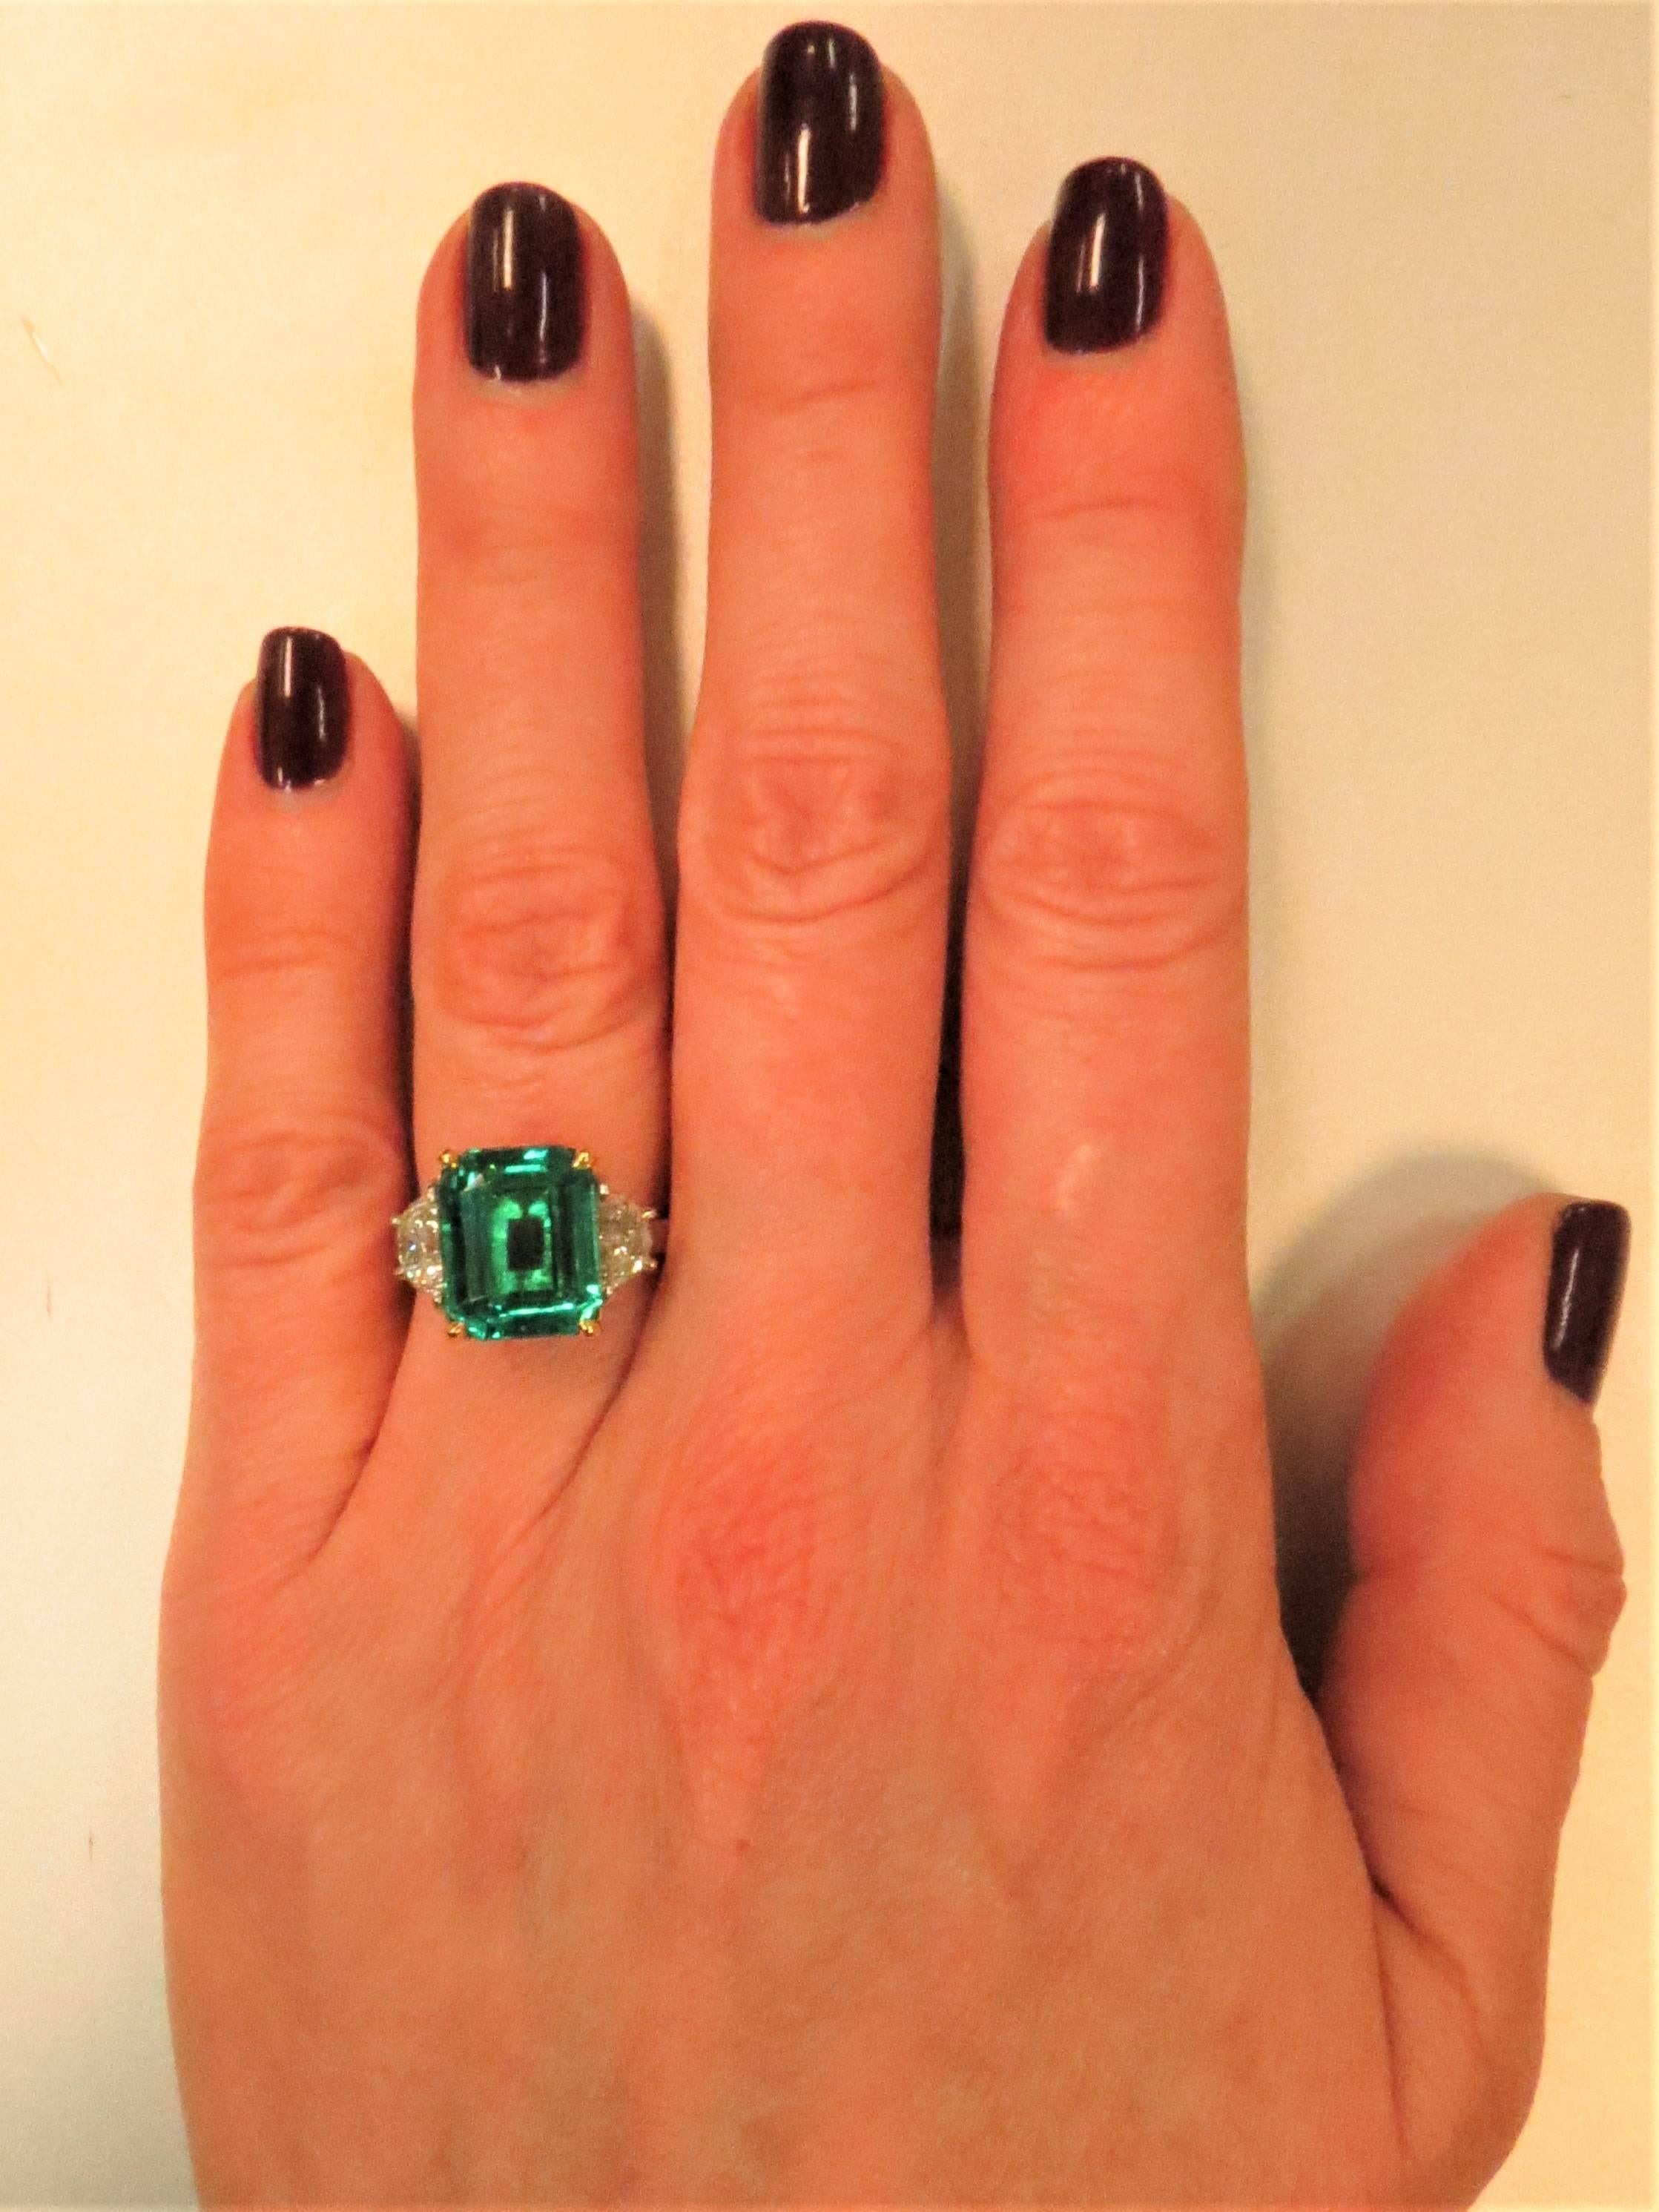 Beautiful platinum ring, prong set in 18K yellow gold, with emerald cut emerald weighing 6.14cts and two half moon diamonds weighing 1ct total, G color, VS clarity
Size 6, may be sized